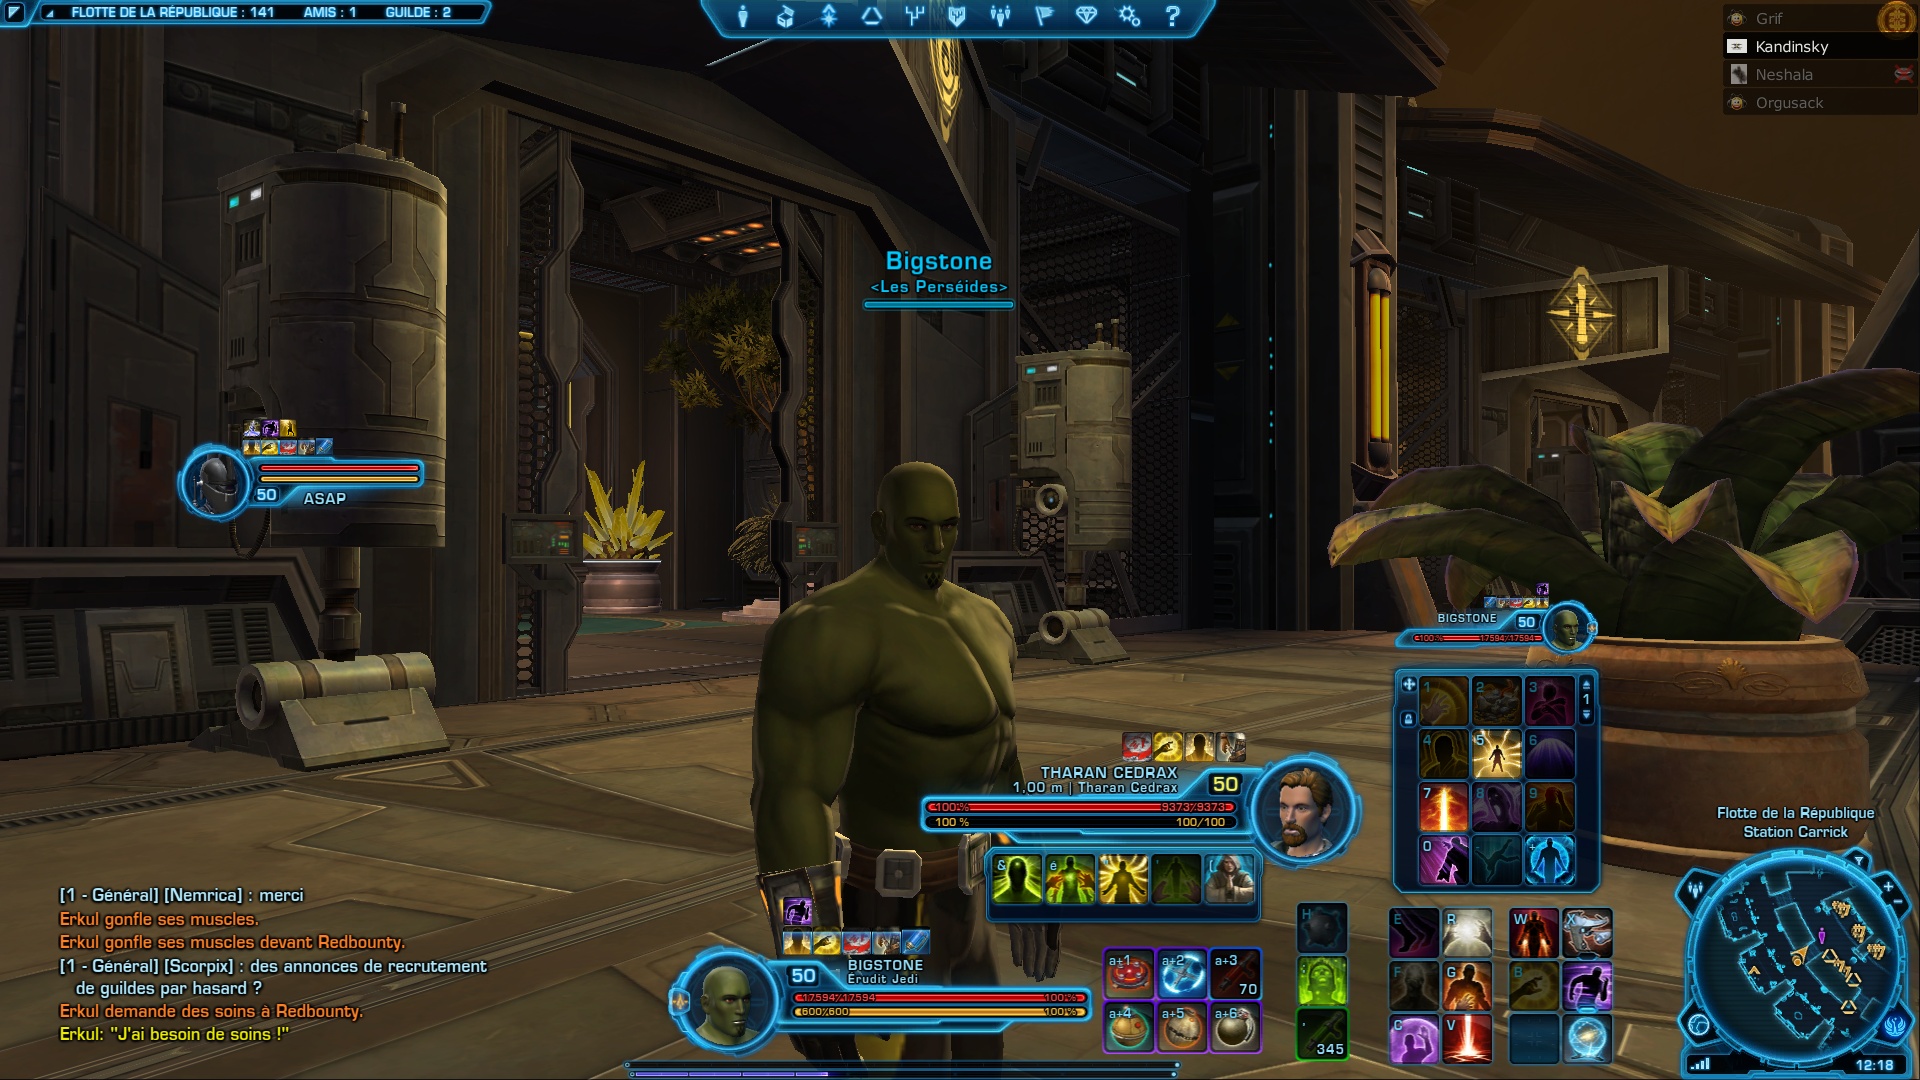 Star Wars The Old Republic Gameplay Exclusivement A La Souris